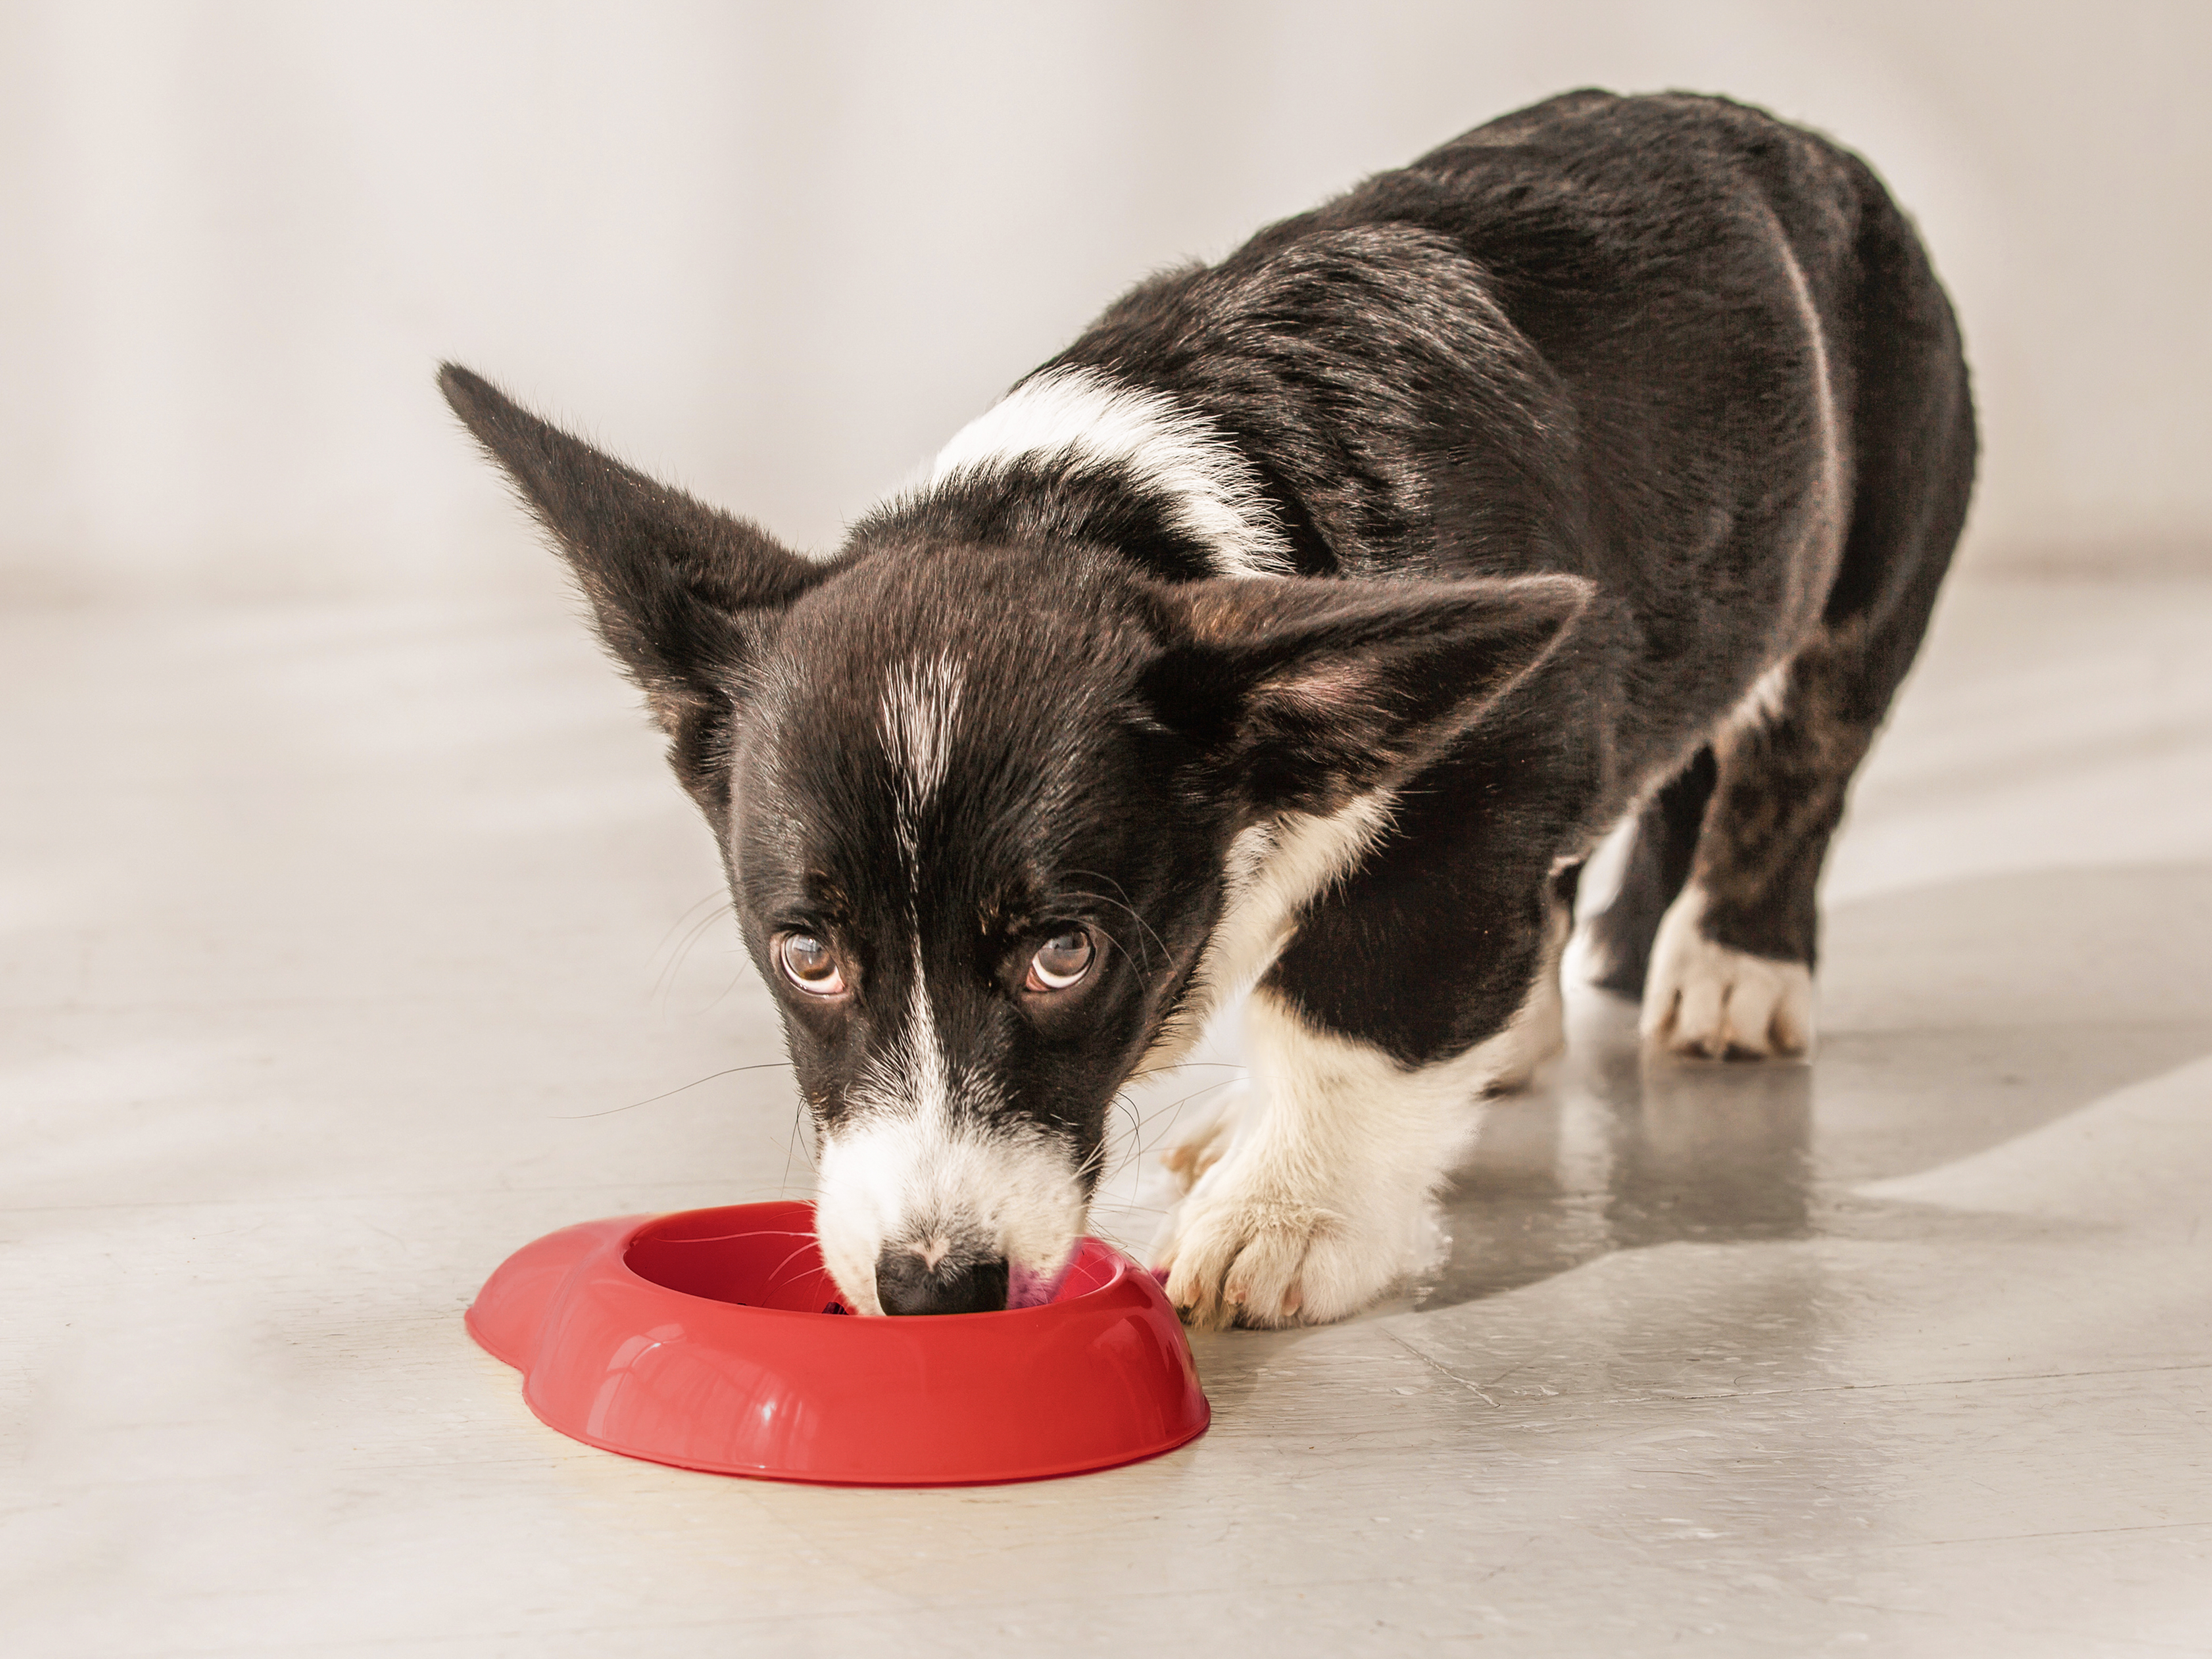 Welsh Cardigan Corgi puppy eating from a red bowl